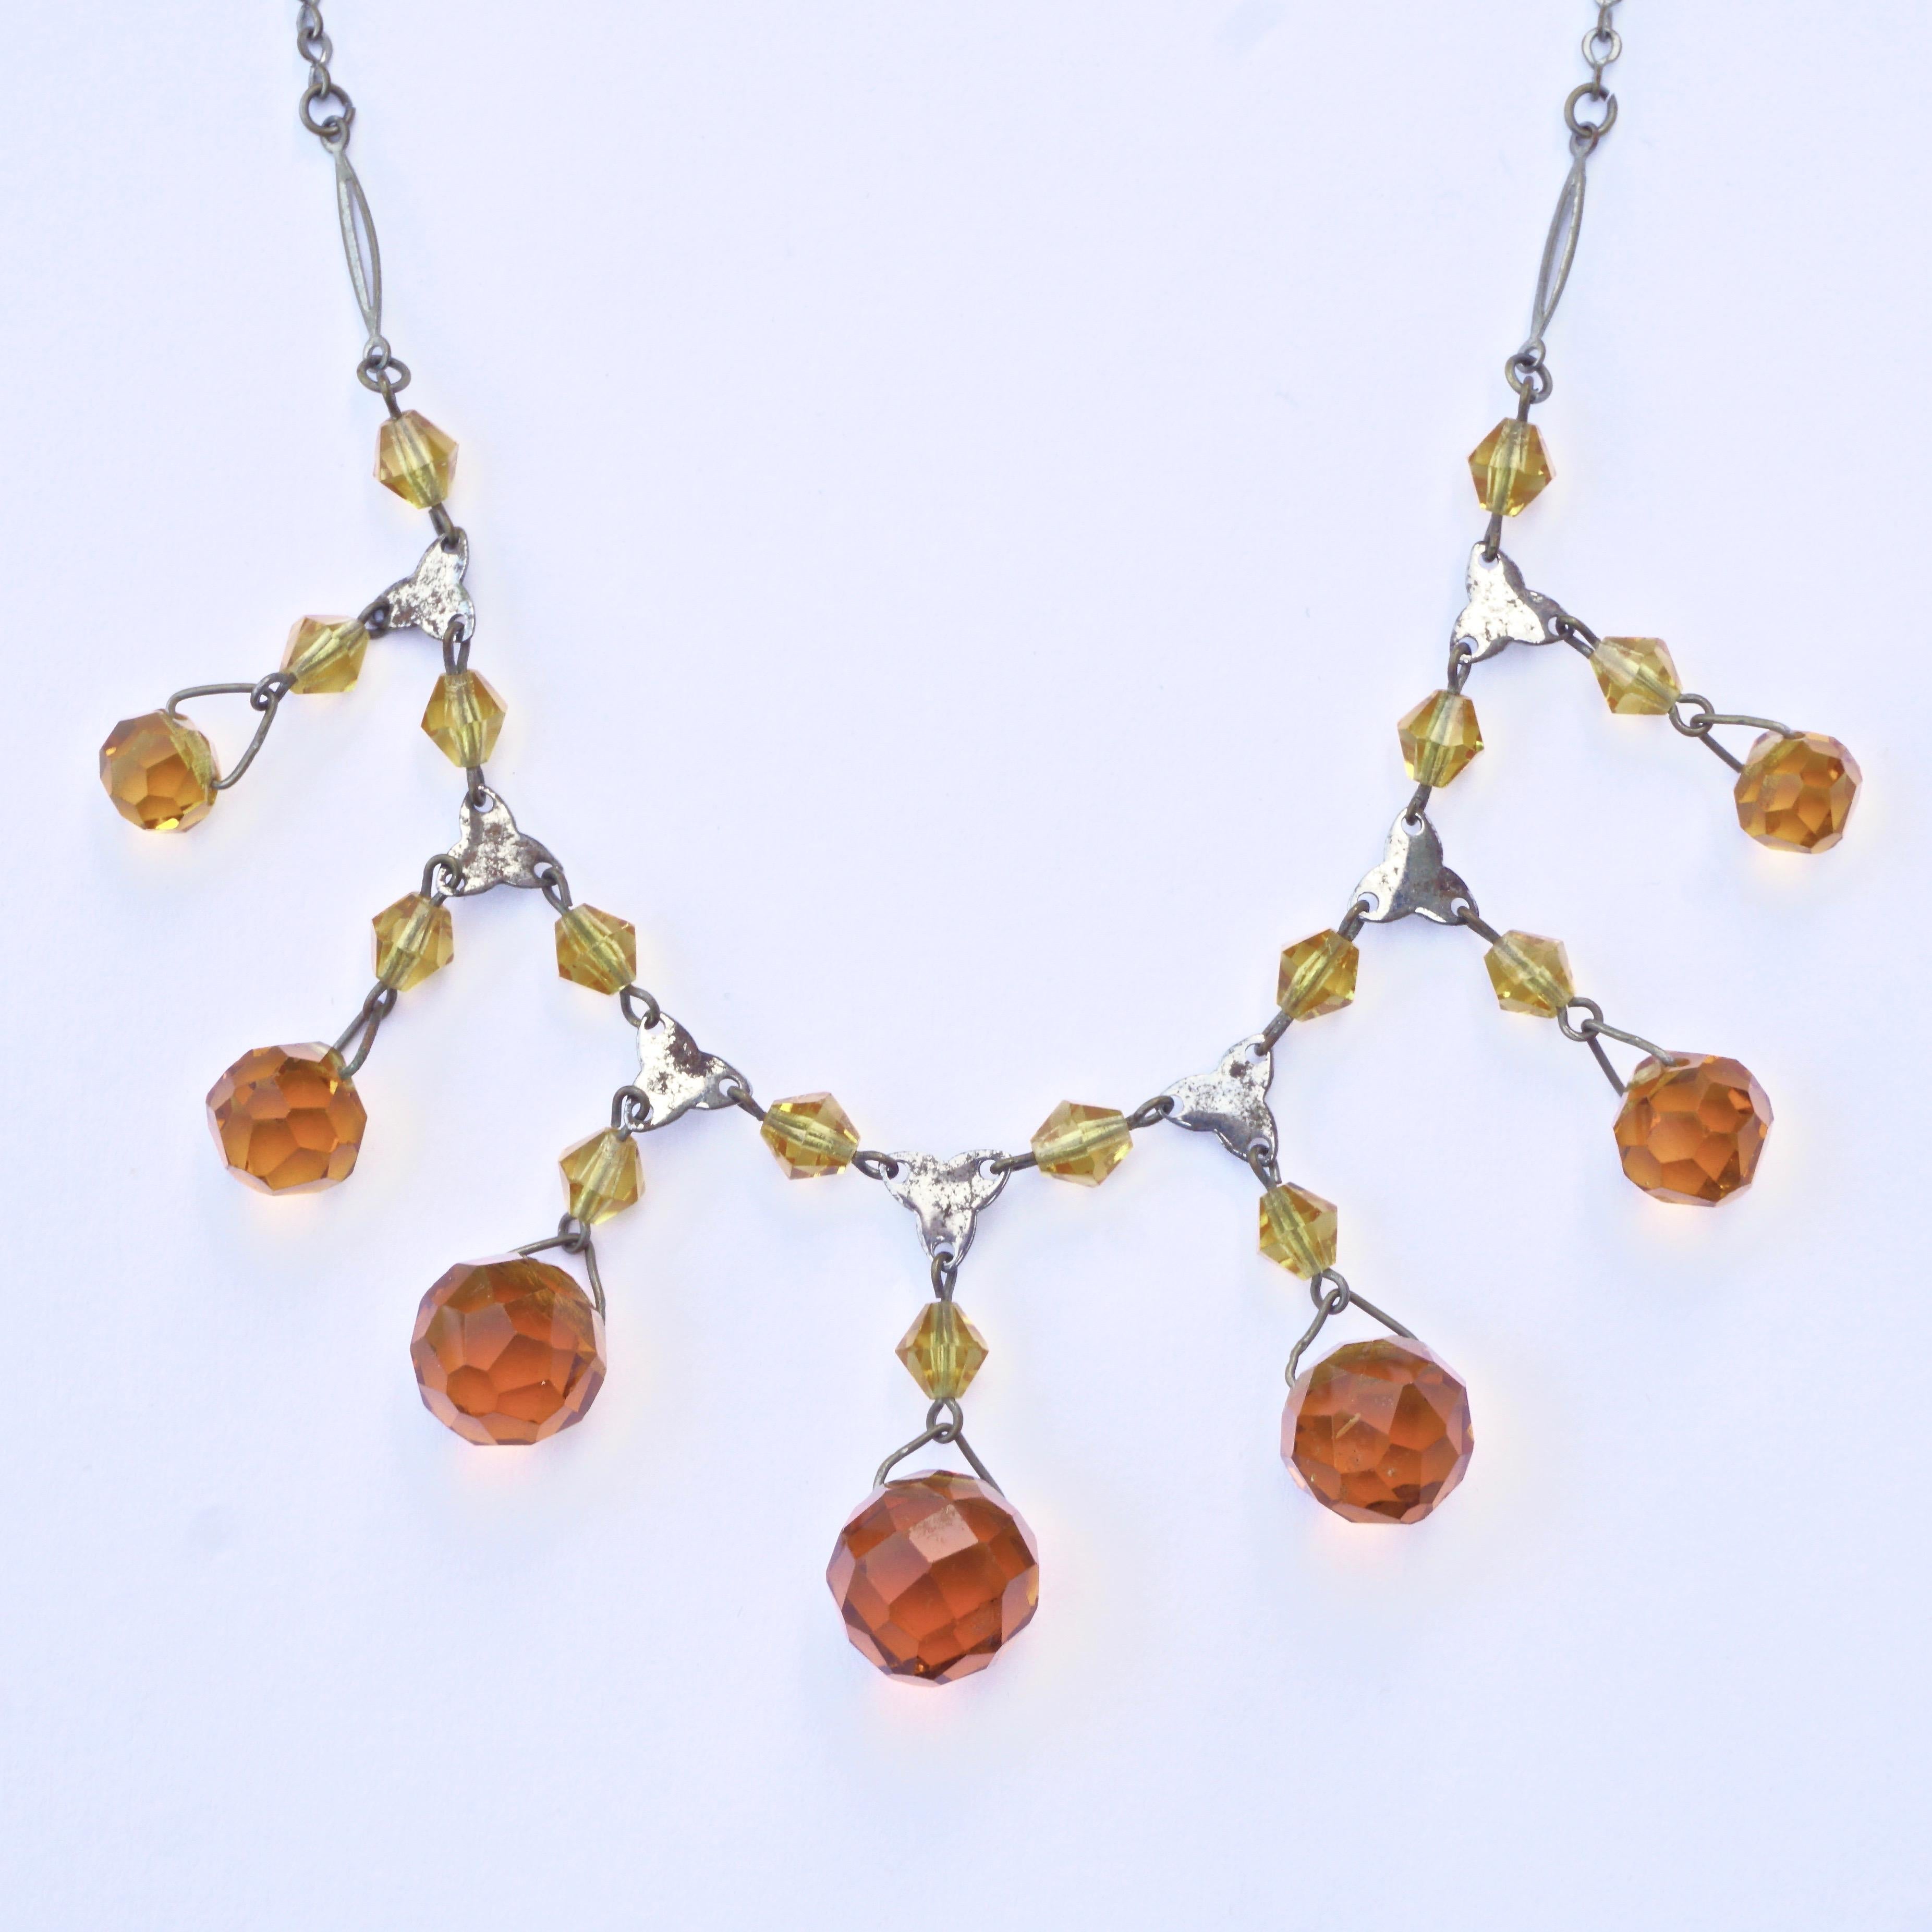 Beautiful Art Deco Czech silver plated necklace, featuring seven amber glass ball drops which are graduated in size and colour, bi-cone beads and decorative spacers. Measuring length 41.1cm / 16.2 inches, and the largest amber drop is 1.15cm / .45